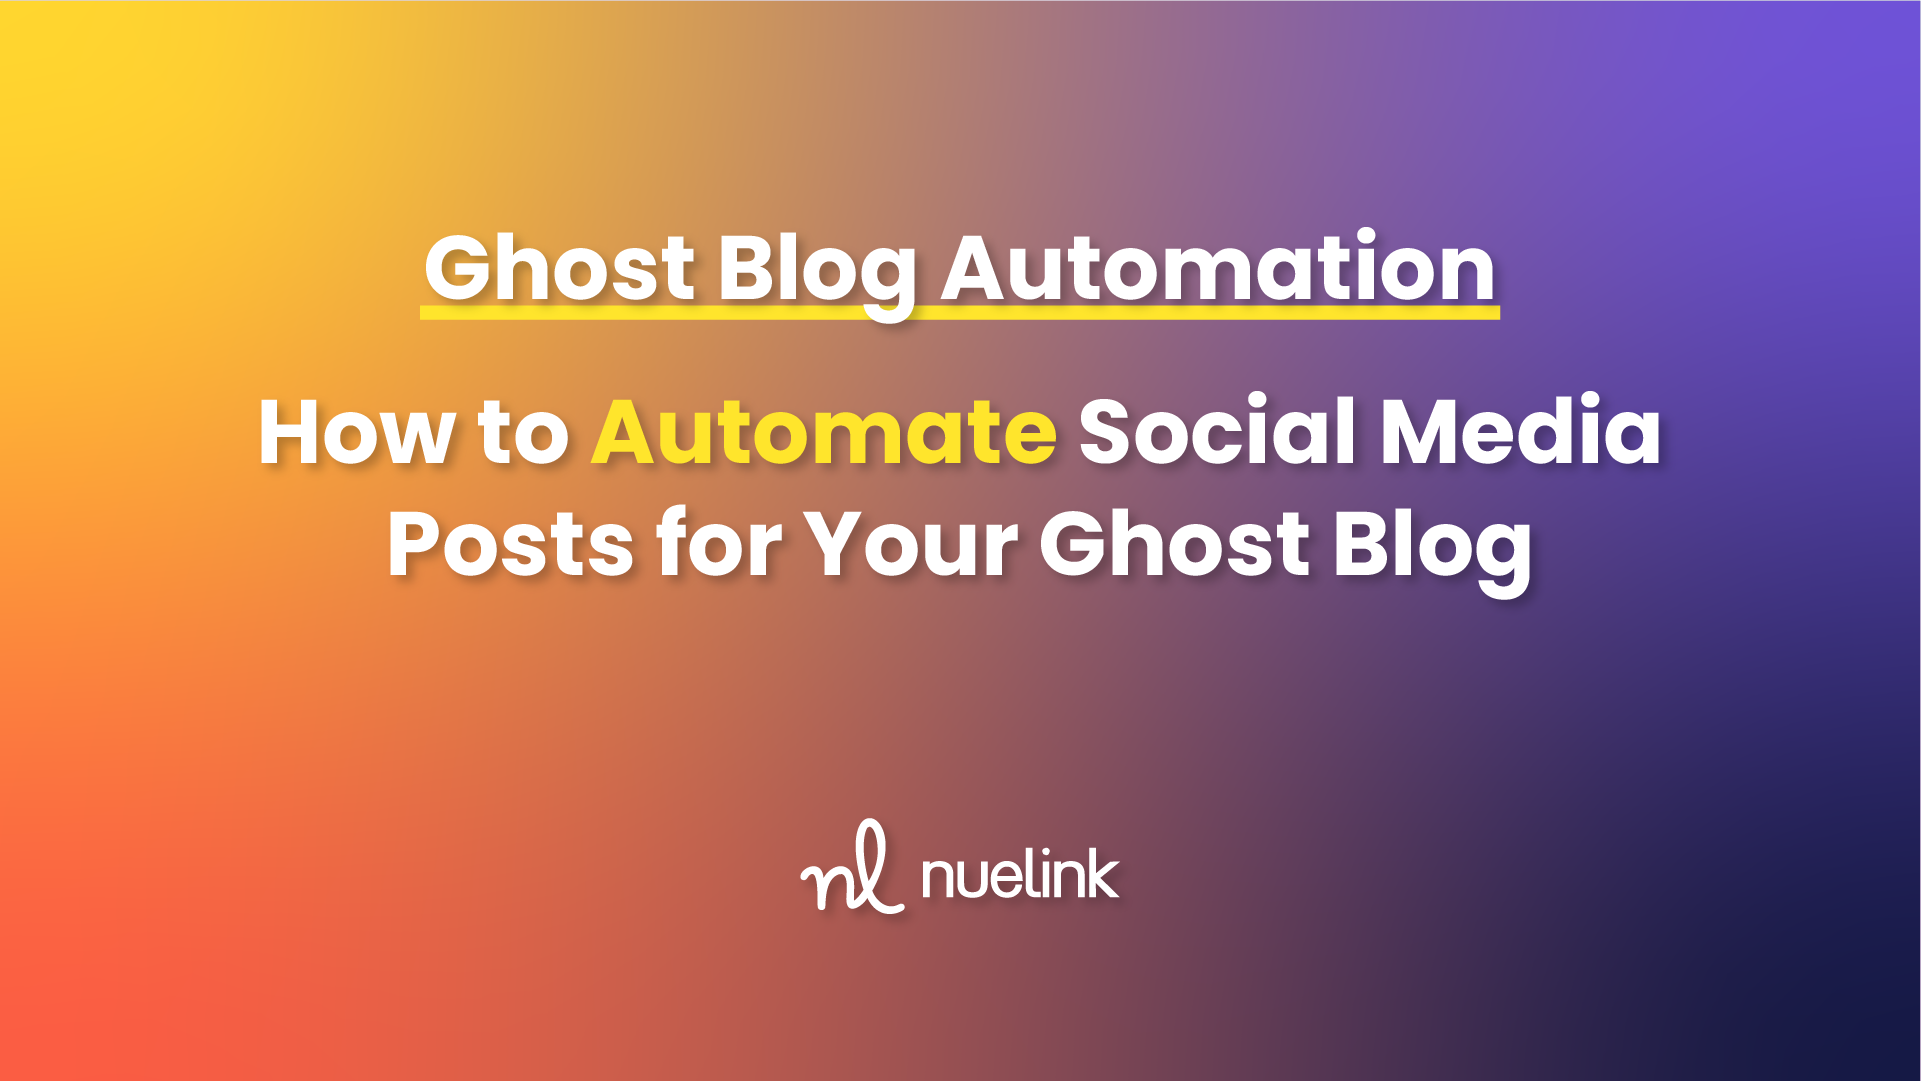 Ghost Blog Automation